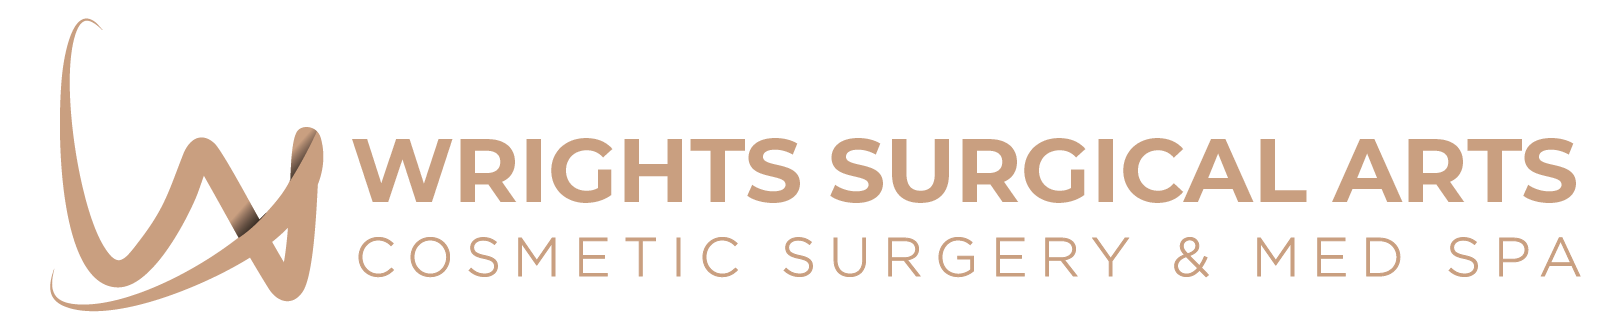 Wrights Surgical Arts